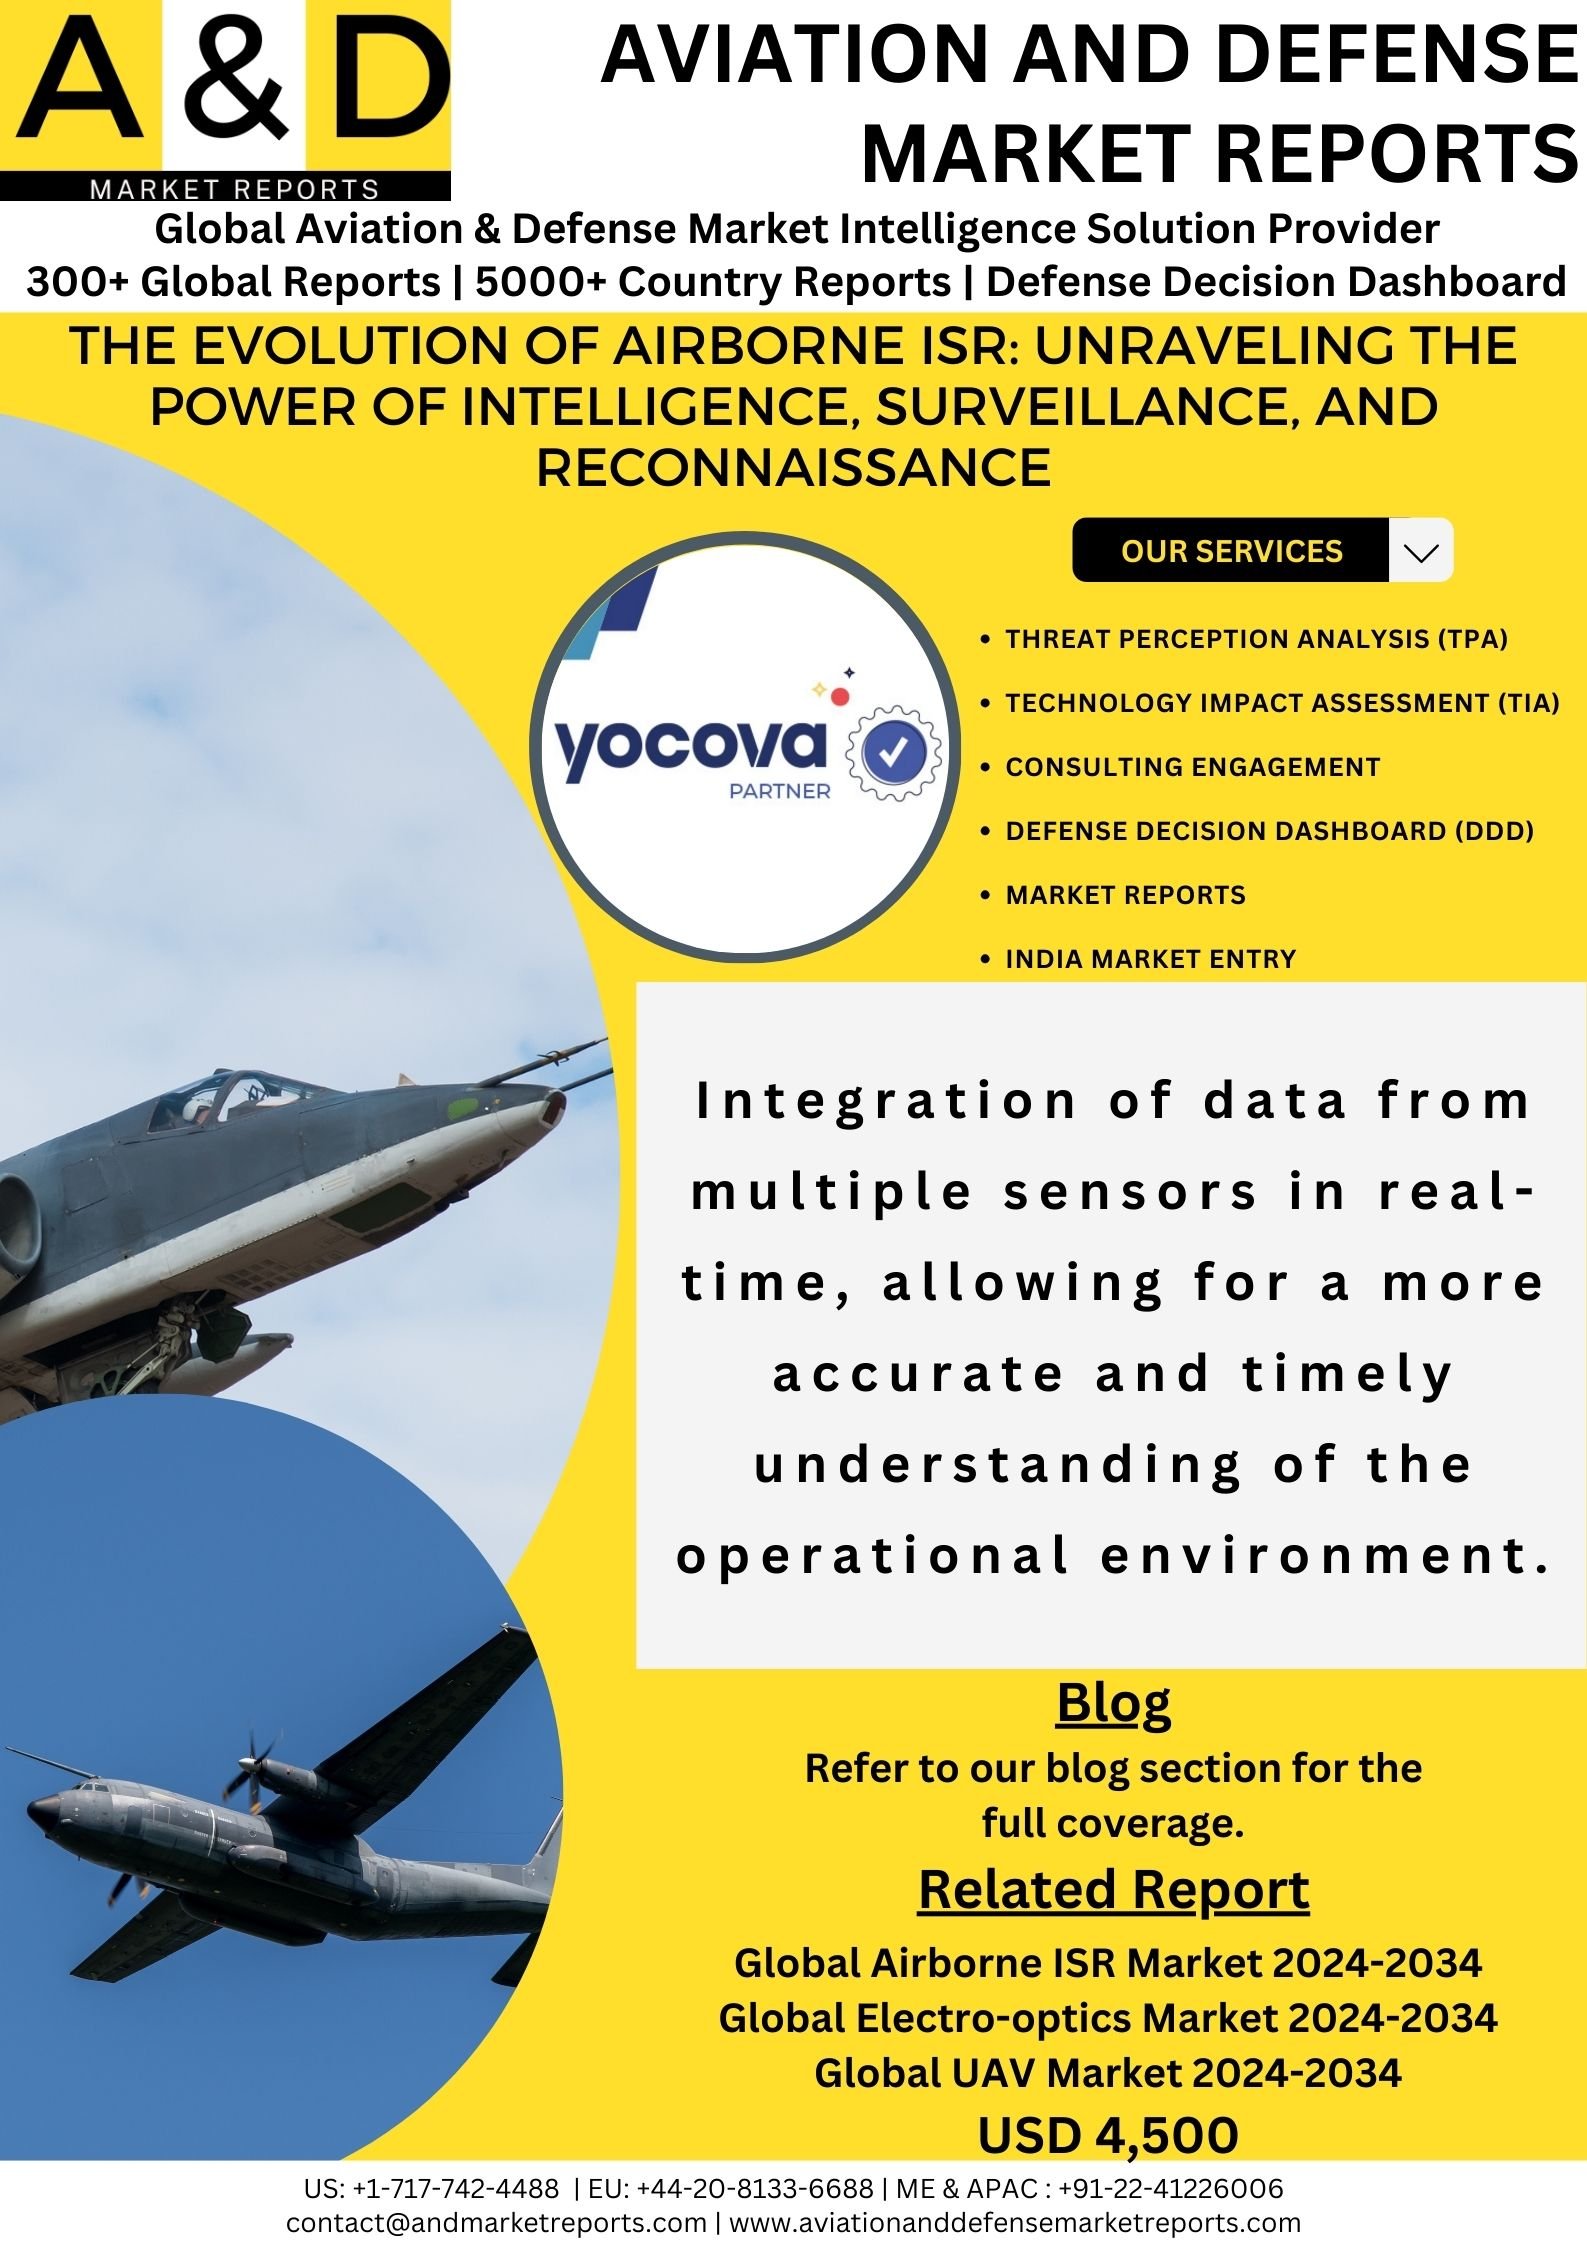 The Evolution Of Airborne ISR: Unraveling The Power Of Intelligence, Surveillance, And Reconnaissance